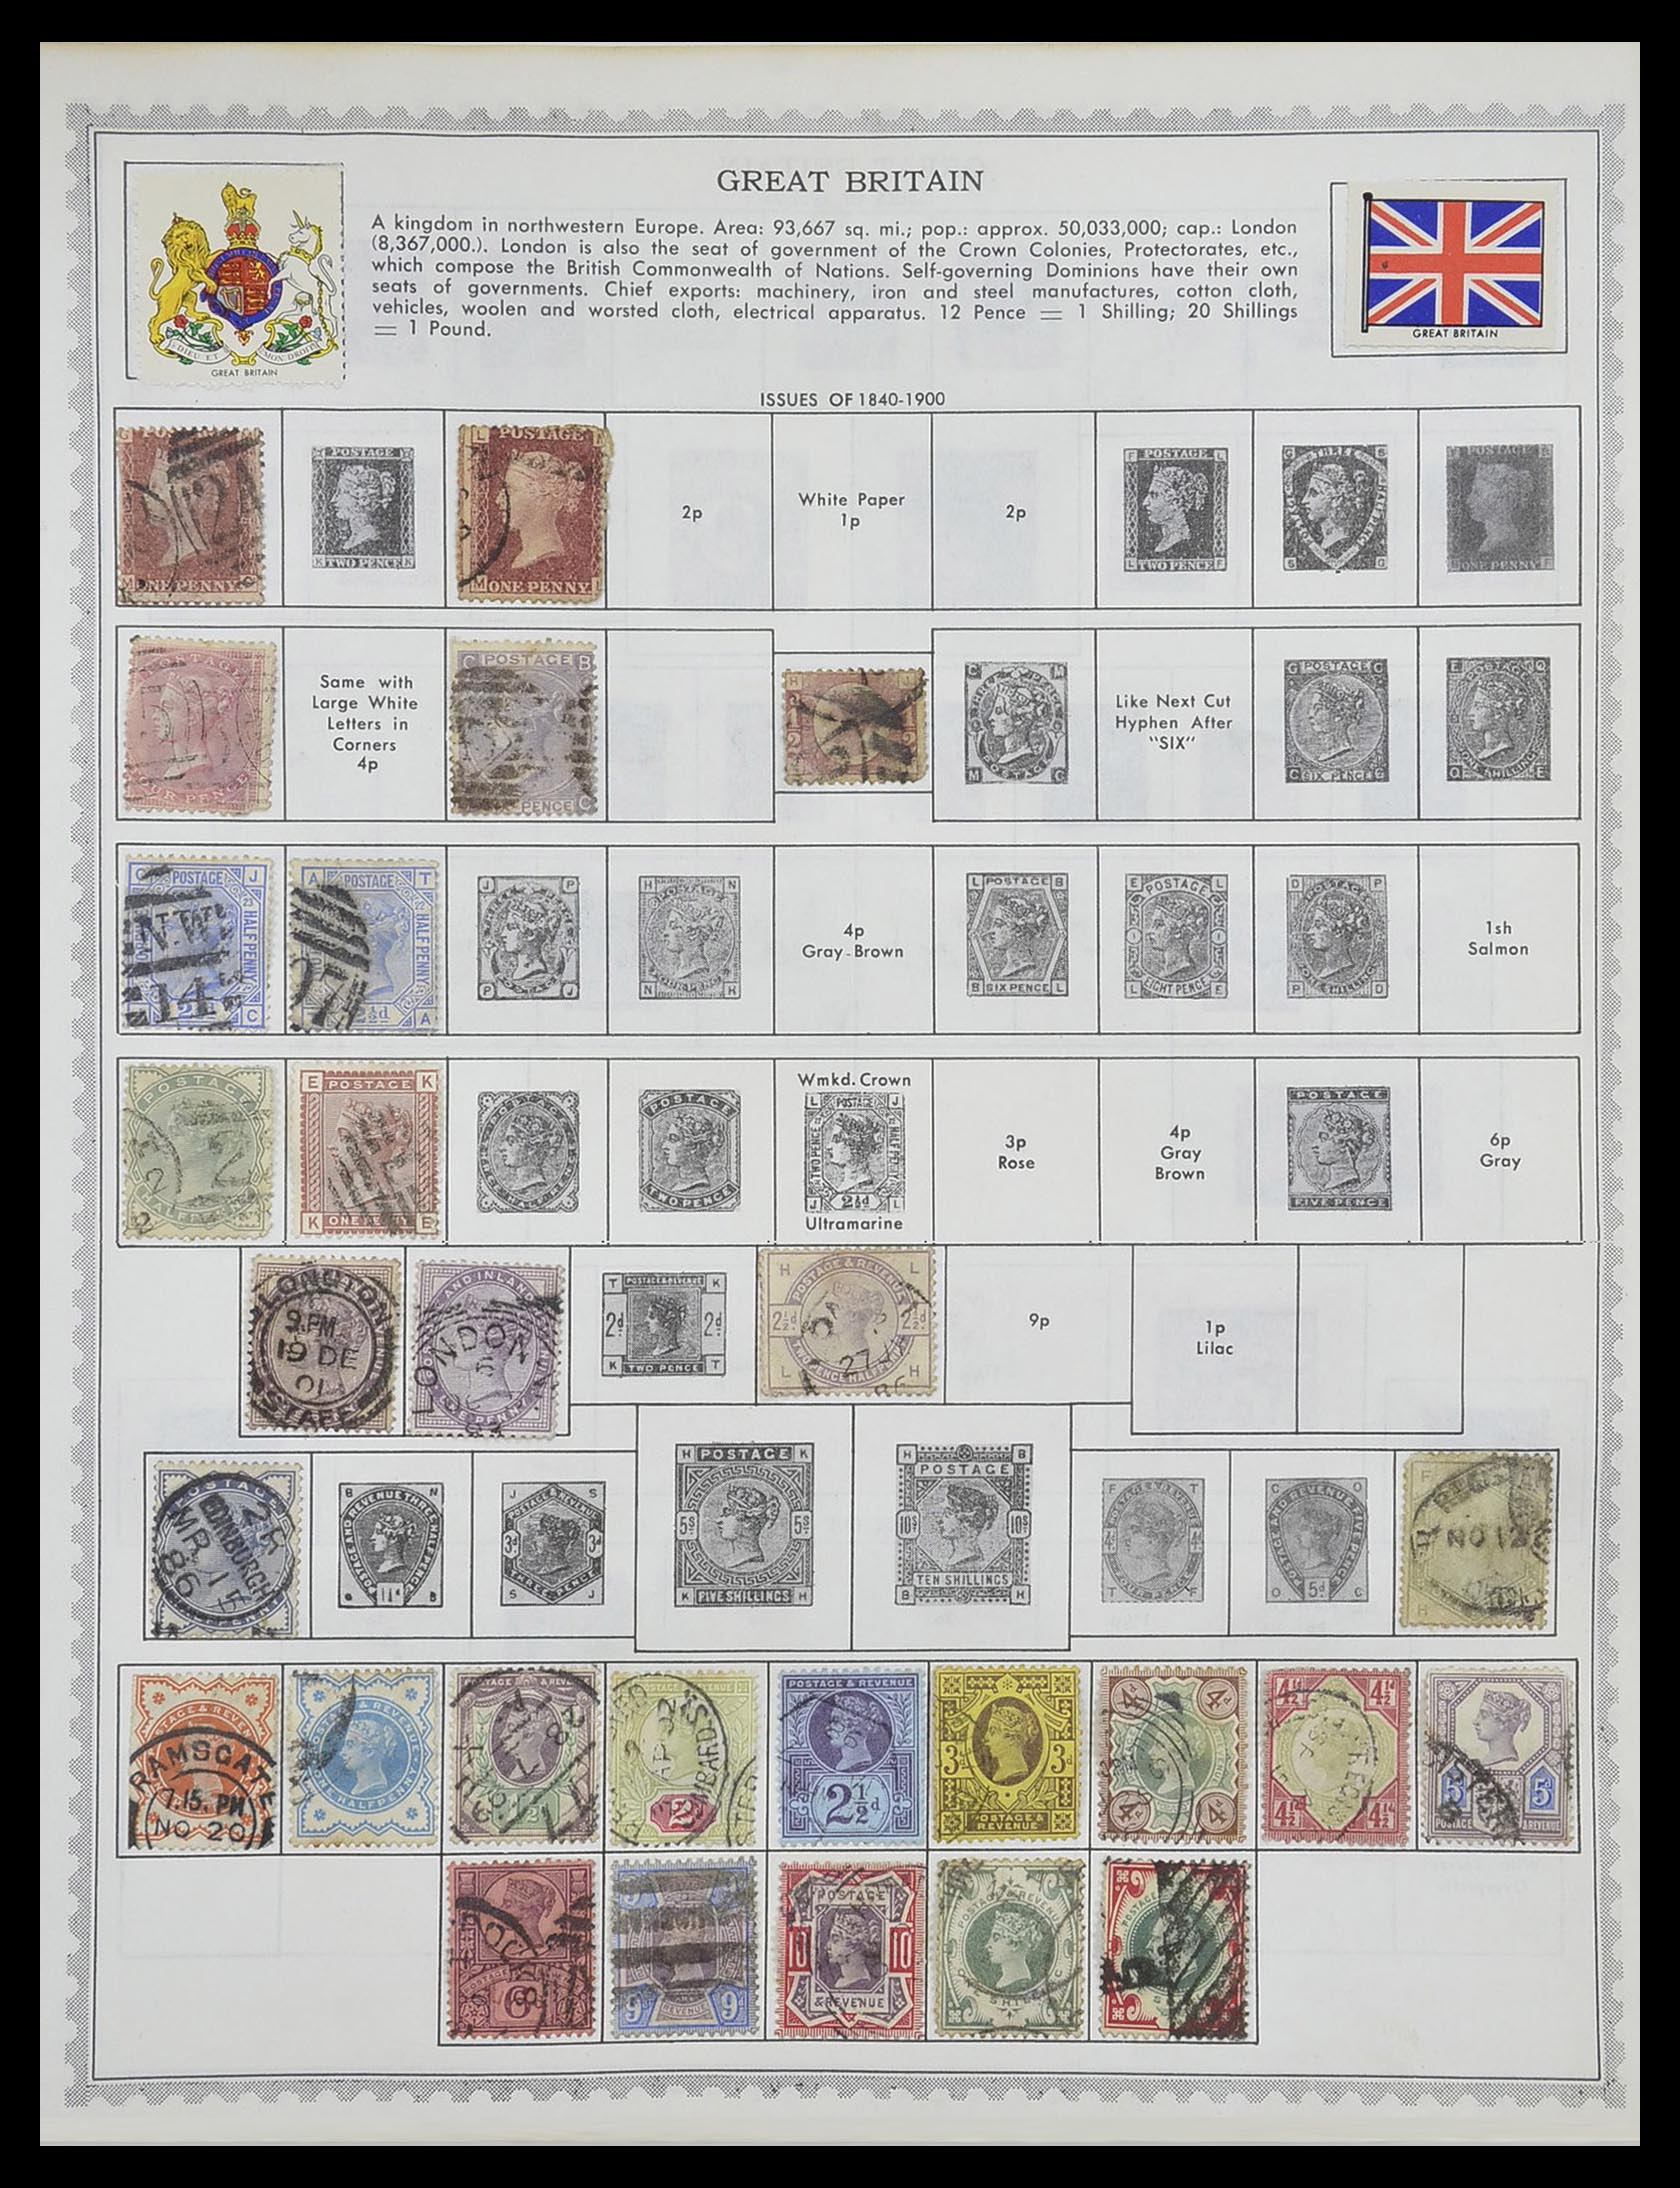 33704 001 - Stamp collection 33704 Great Britain and colonies 1858-1995.